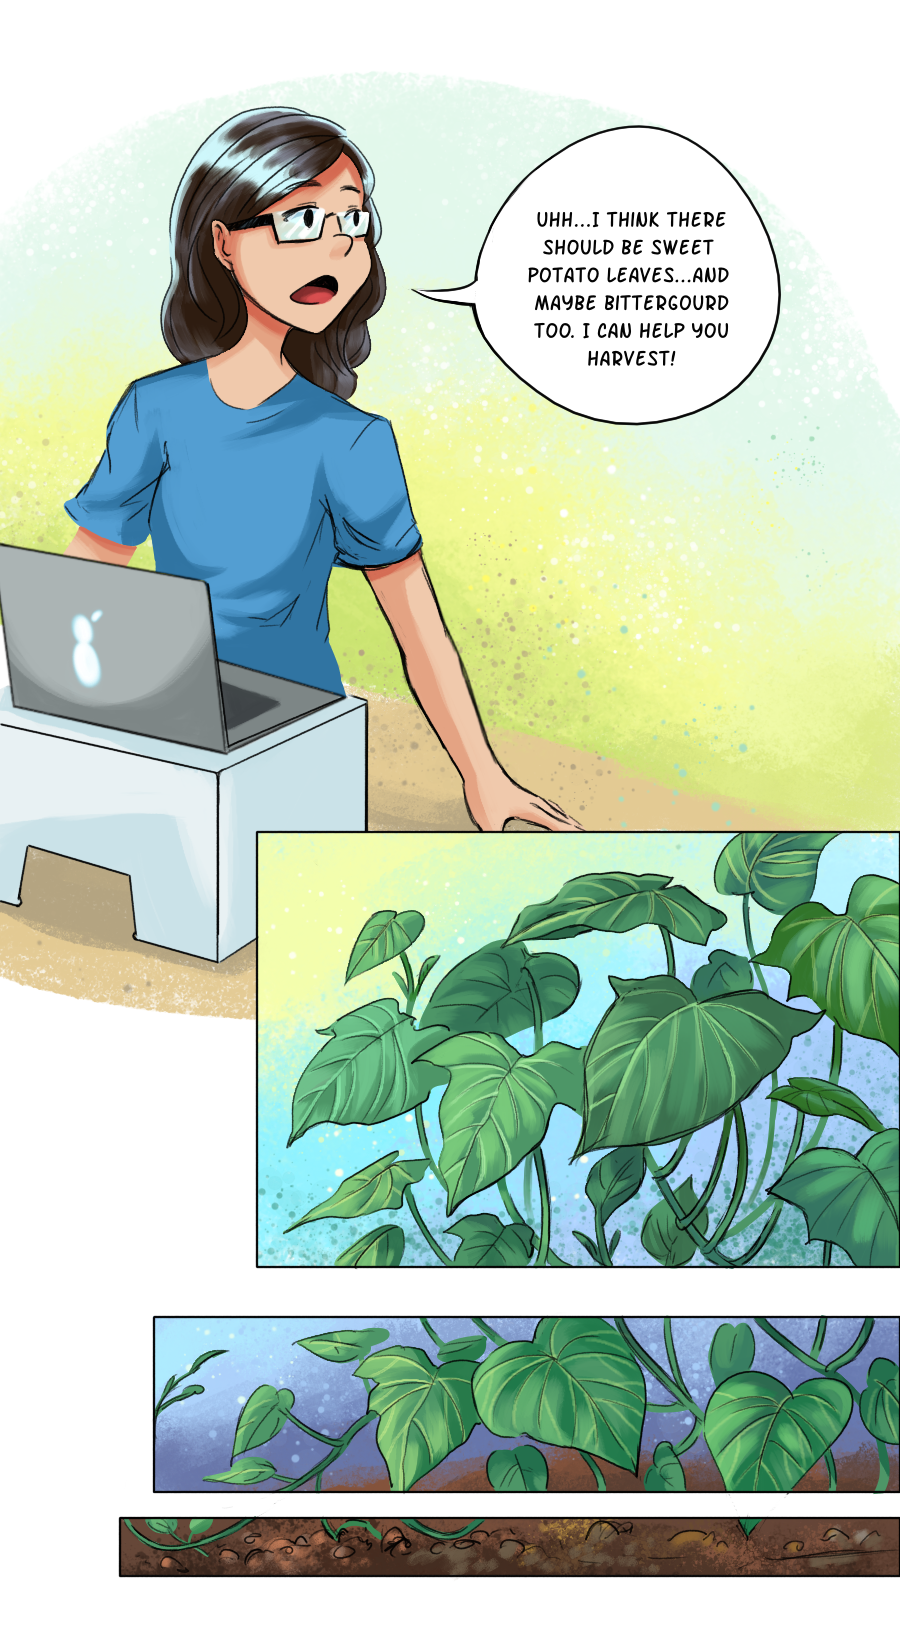 One of the scene from episode 5 of my webcomic Refu(SE/SL/GE), showing me sitting in front of my laptop, offering to help my mom harvest some veggies from the garden. Panel below shows sweet potato leaves growing luxuriantly.